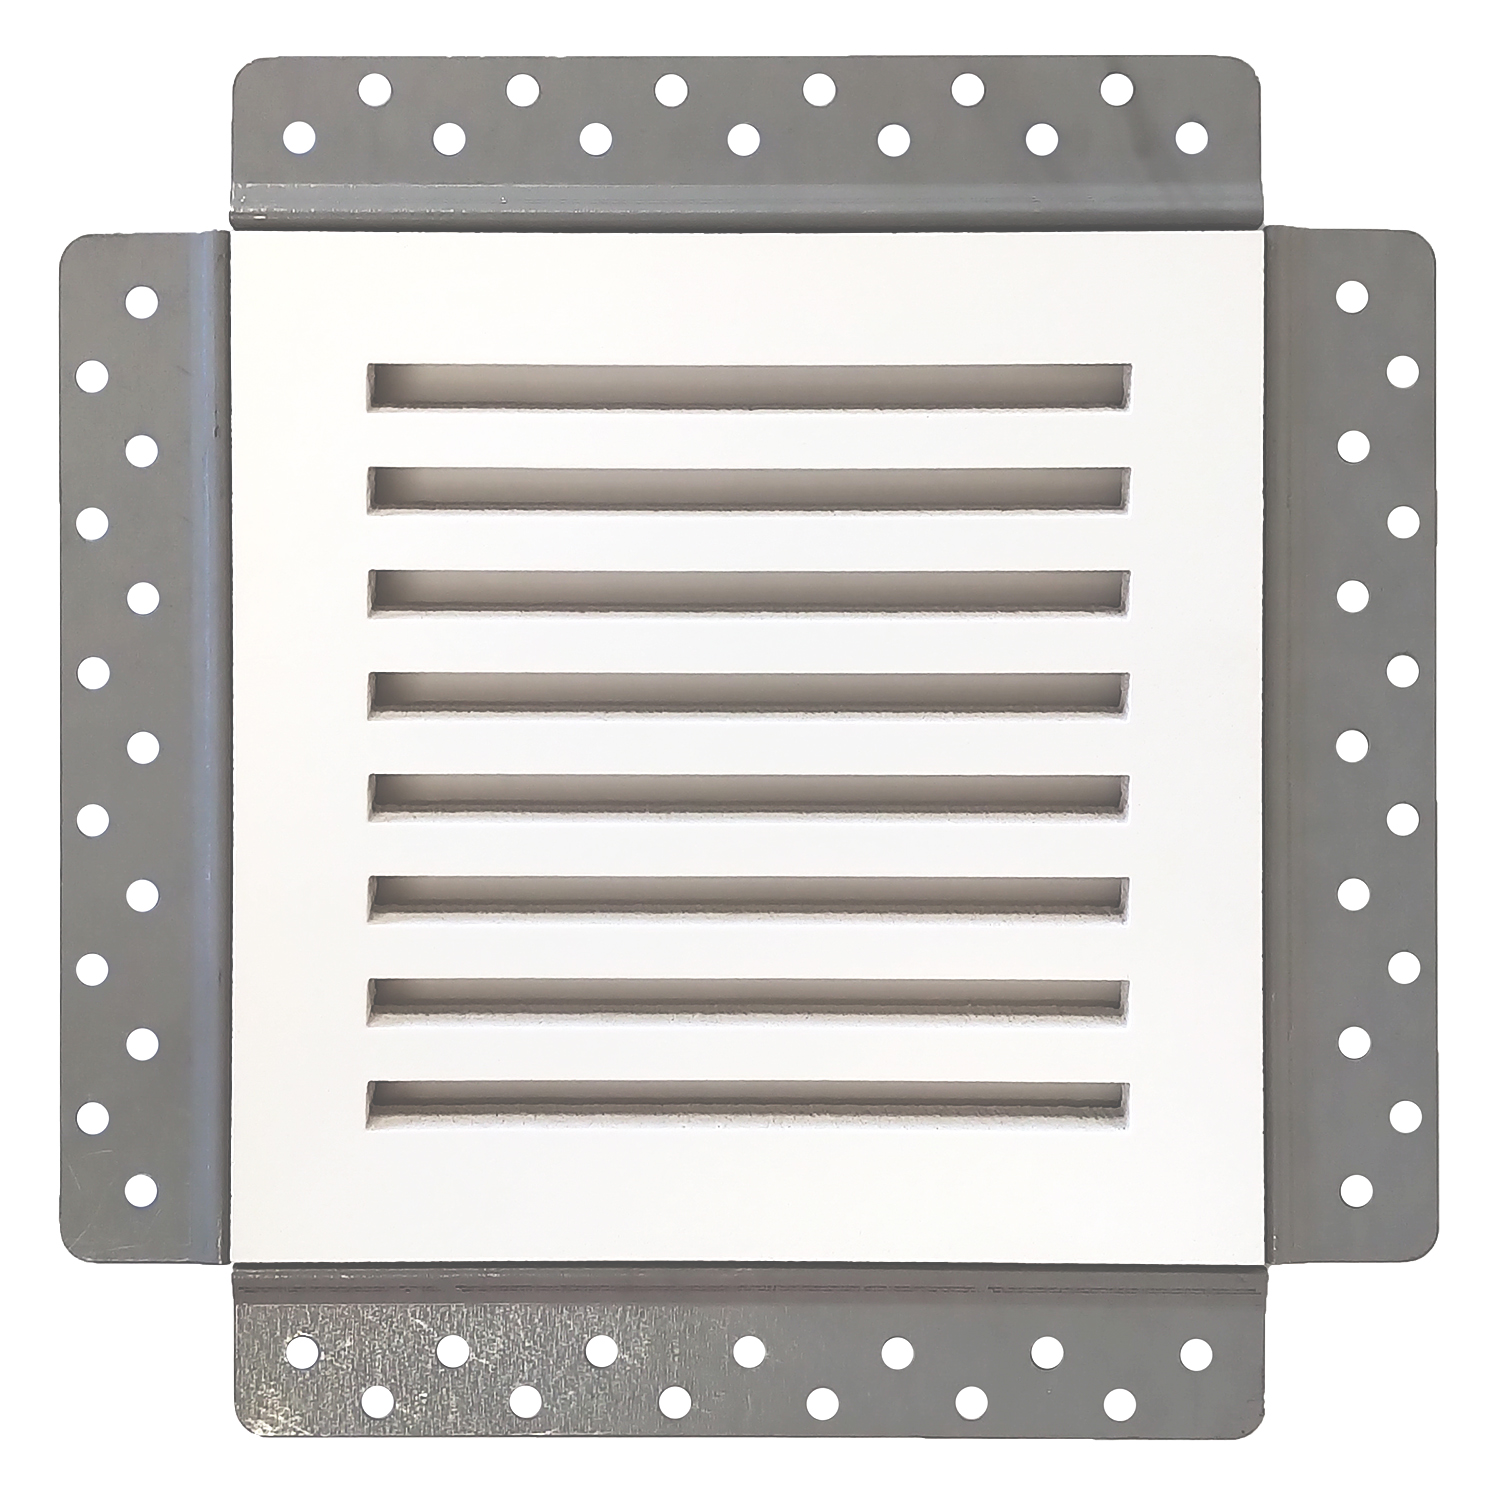 Envisivent Removable Mud In Flush Mount Air Return Vent 8” X 8” Drywall Opening Wallboard